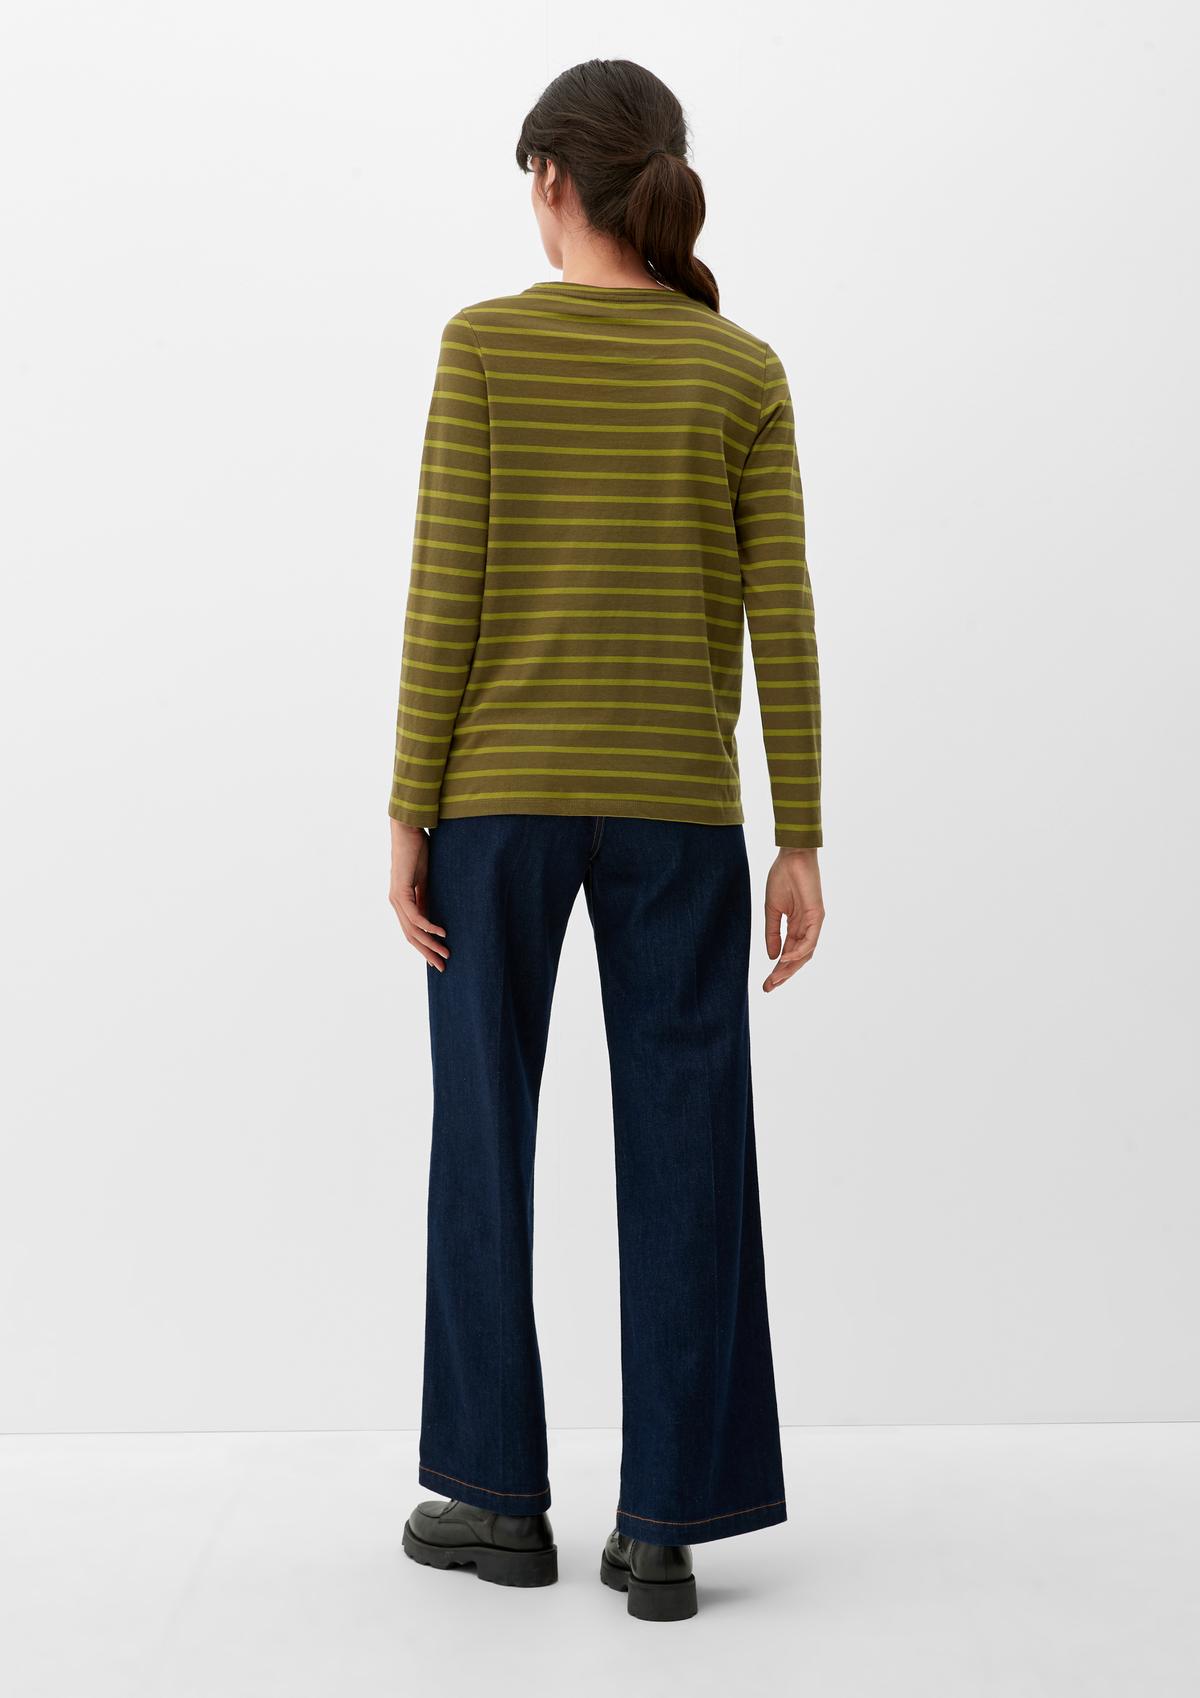 s.Oliver Cotton-jersey long sleeve top